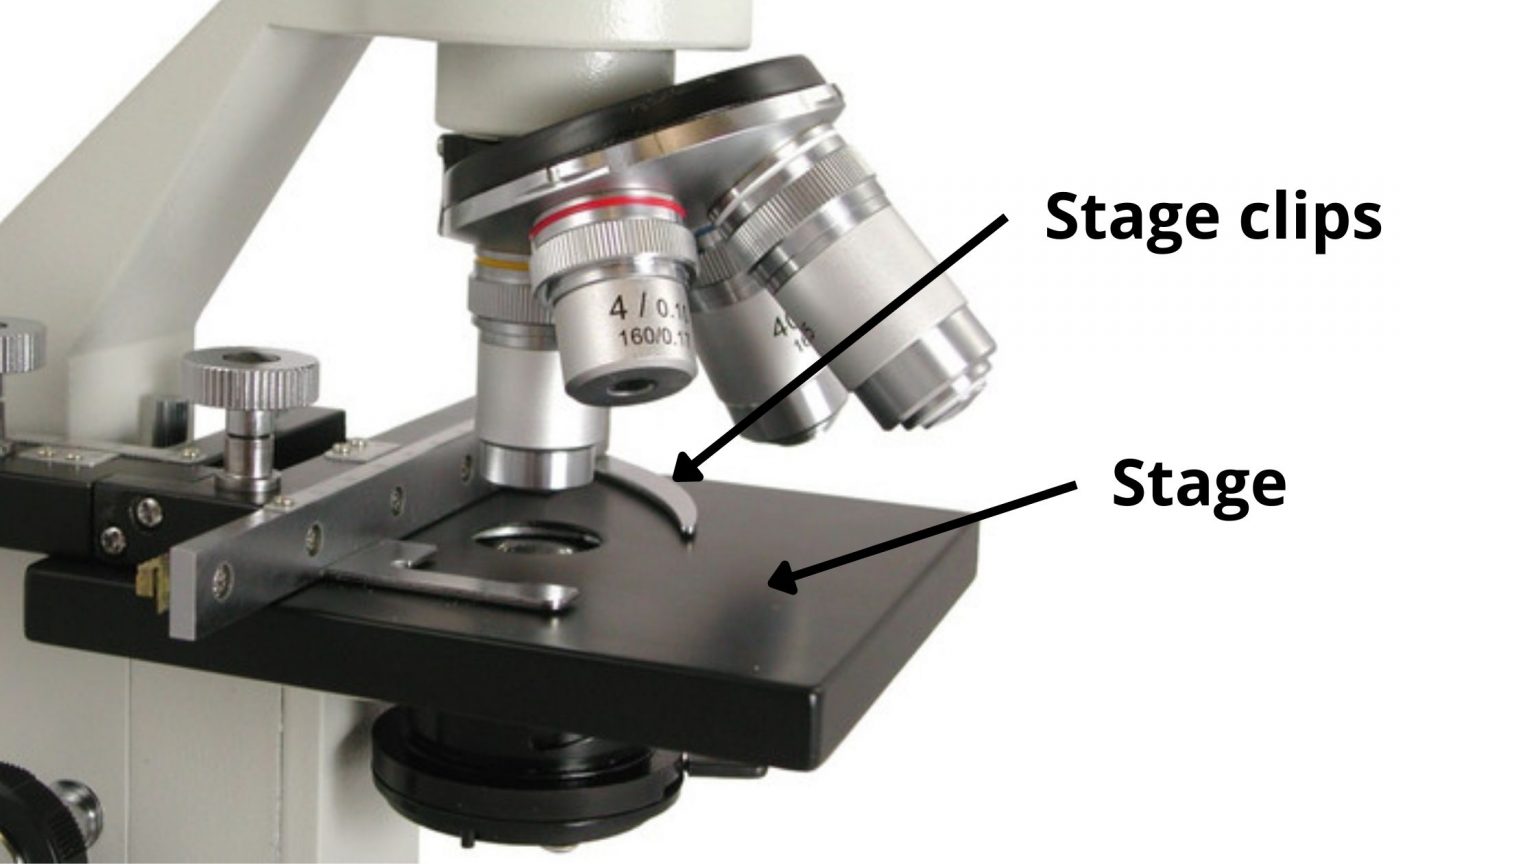 Parts Of A Microscope And Their Functions